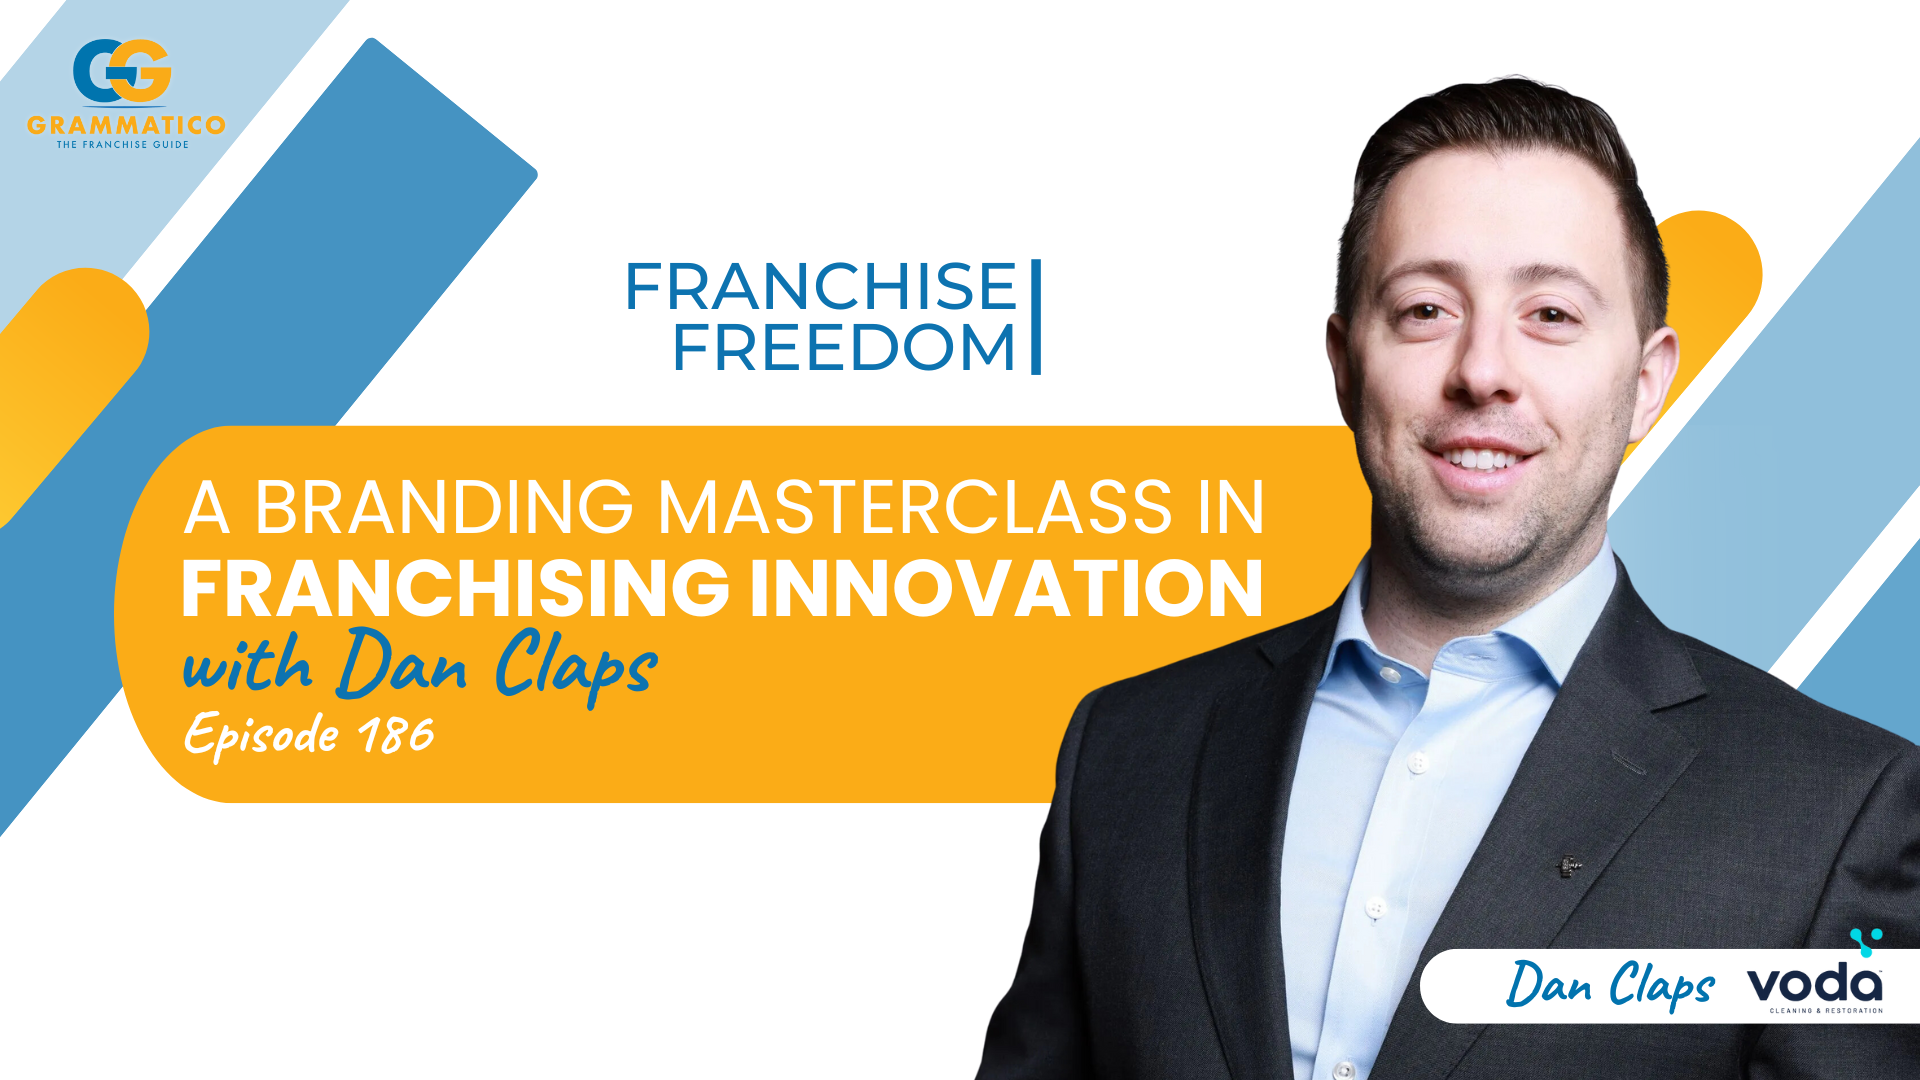 A Branding Masterclass in Franchising Innovation with Dan Claps